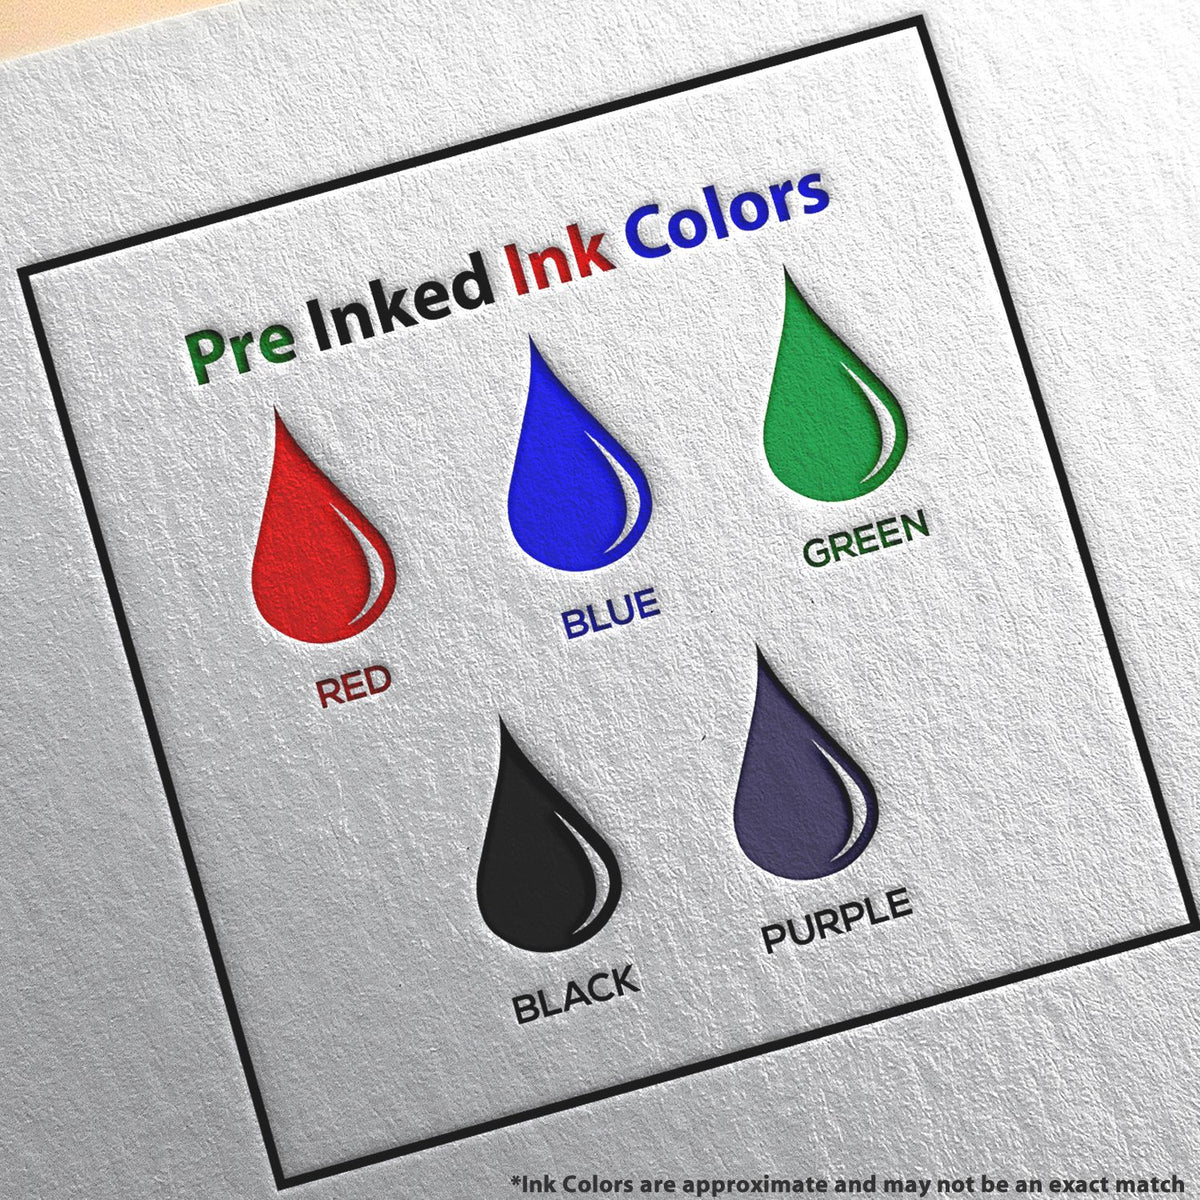 A picture showing the different ink colors or hues available for the Slim Pre-Inked New Hampshire Architect Seal Stamp product.